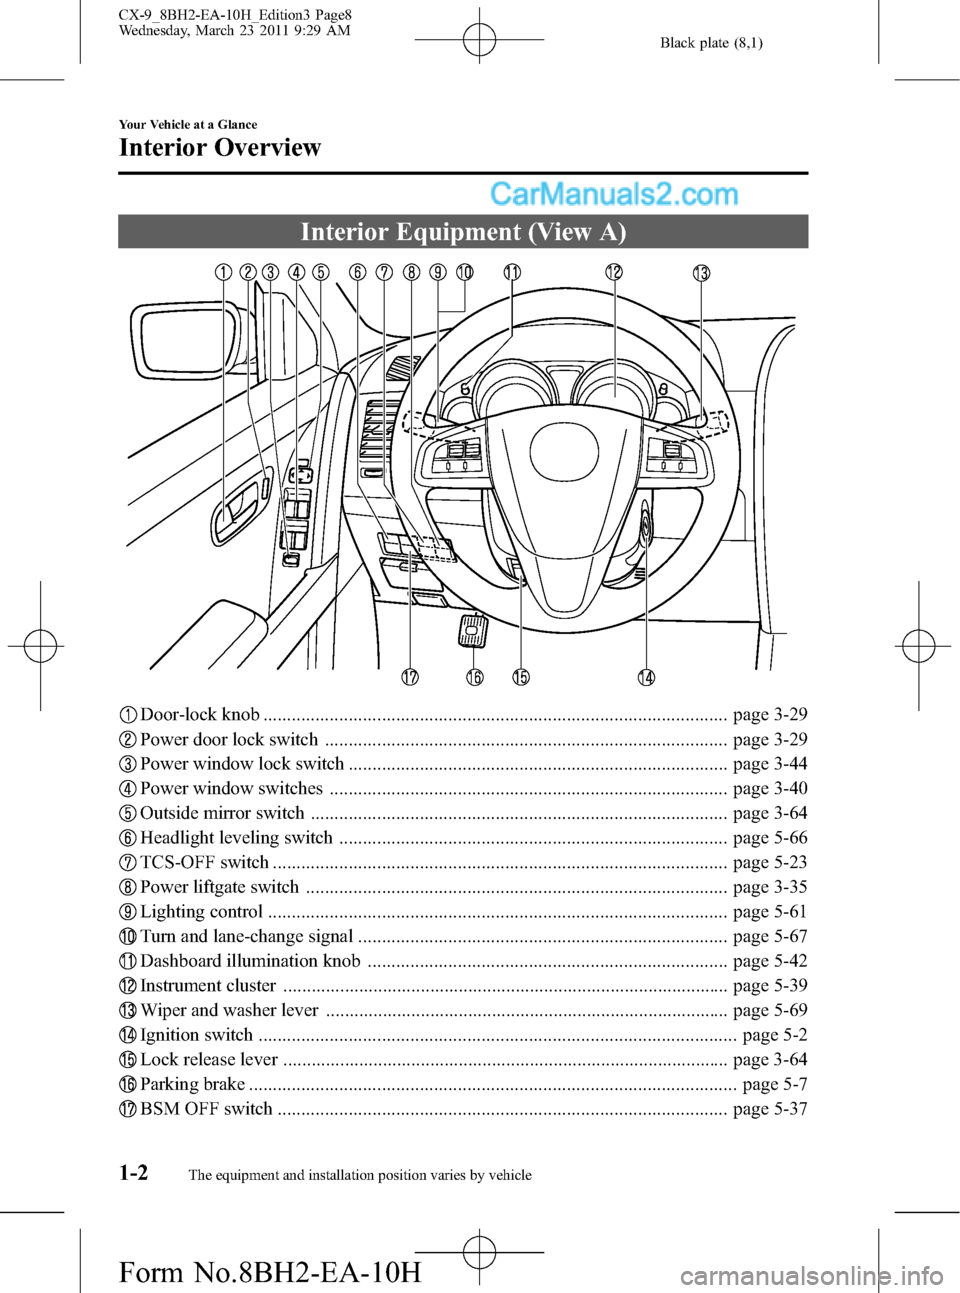 MAZDA MODEL CX-9 2011  Owners Manual (in English) Black plate (8,1)
Interior Equipment (View A)
Door-lock knob .................................................................................................. page 3-29
Power door lock switch .......